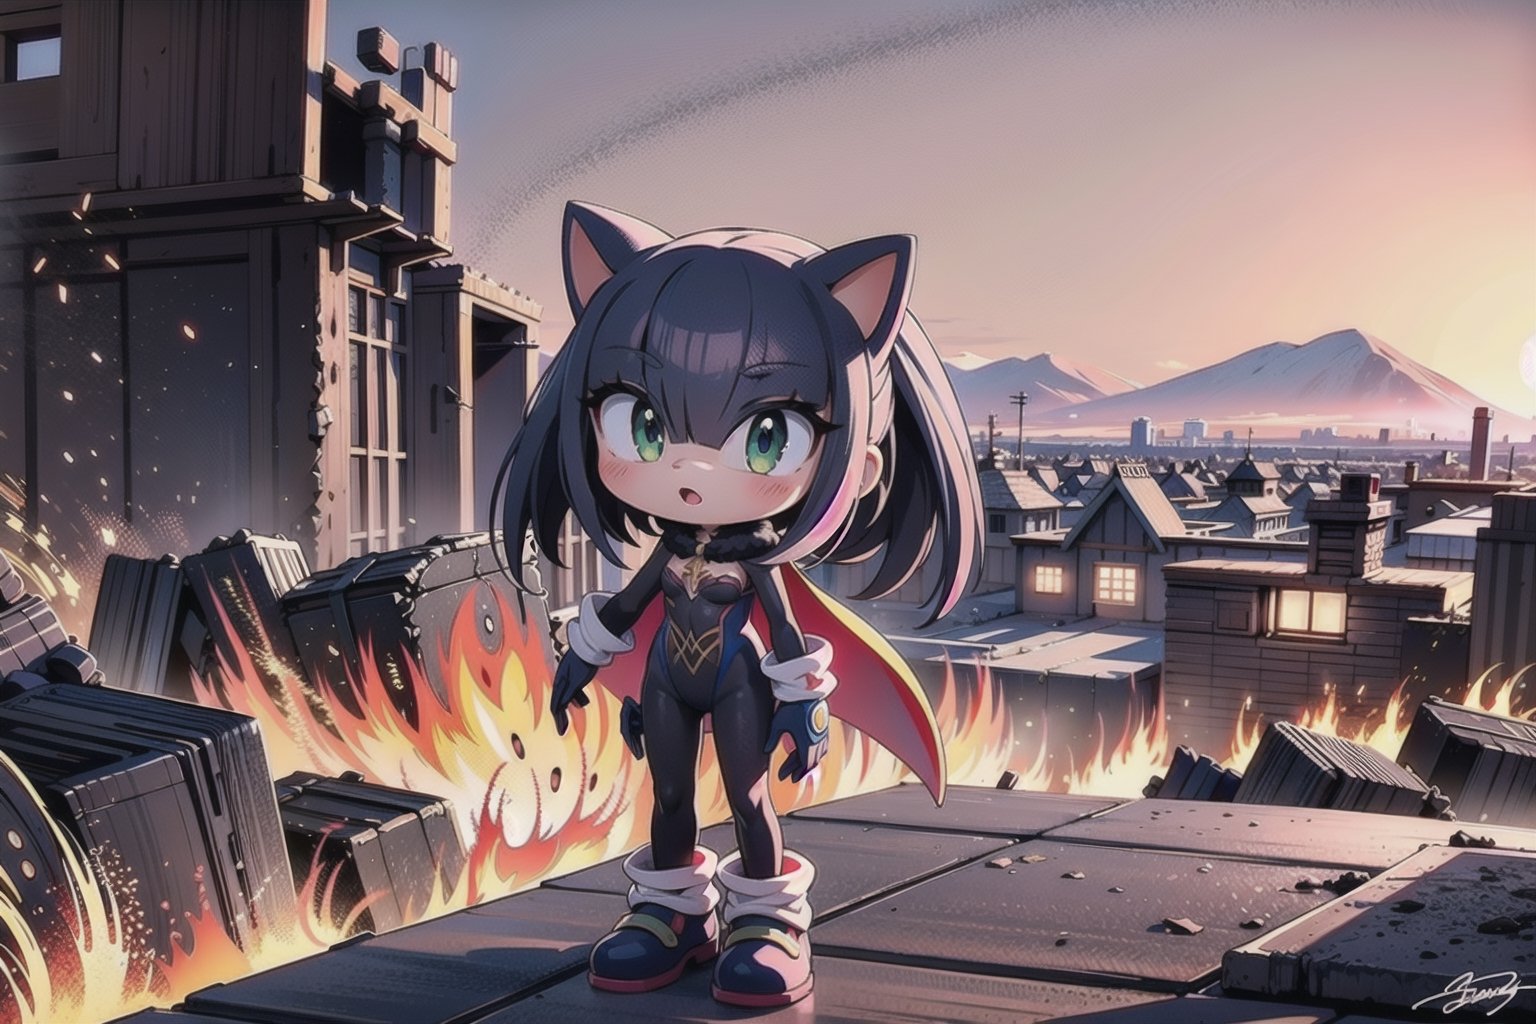 Monadef and (Sonic the Hedgehog) stand tall amidst smoldering Looney Island, their figures silhouetted against a fiery orange sky. The desolate landscape stretches out before them, a barren expanse of charred ruins and twisted metal. Monadef's determined expression is a sharp contrast to the devastation, her eyes fixed on some distant point with unwavering resolve. Sonic the Hedgehog, ever the hero, stands at her side, his blue spikes and red shoes stark against the dull gray stone. The texture of their suits, the creases in their faces, and every detail of their forms are rendered in breathtakingly realistic 32K UHD, as if they might step out of the frame at any moment.